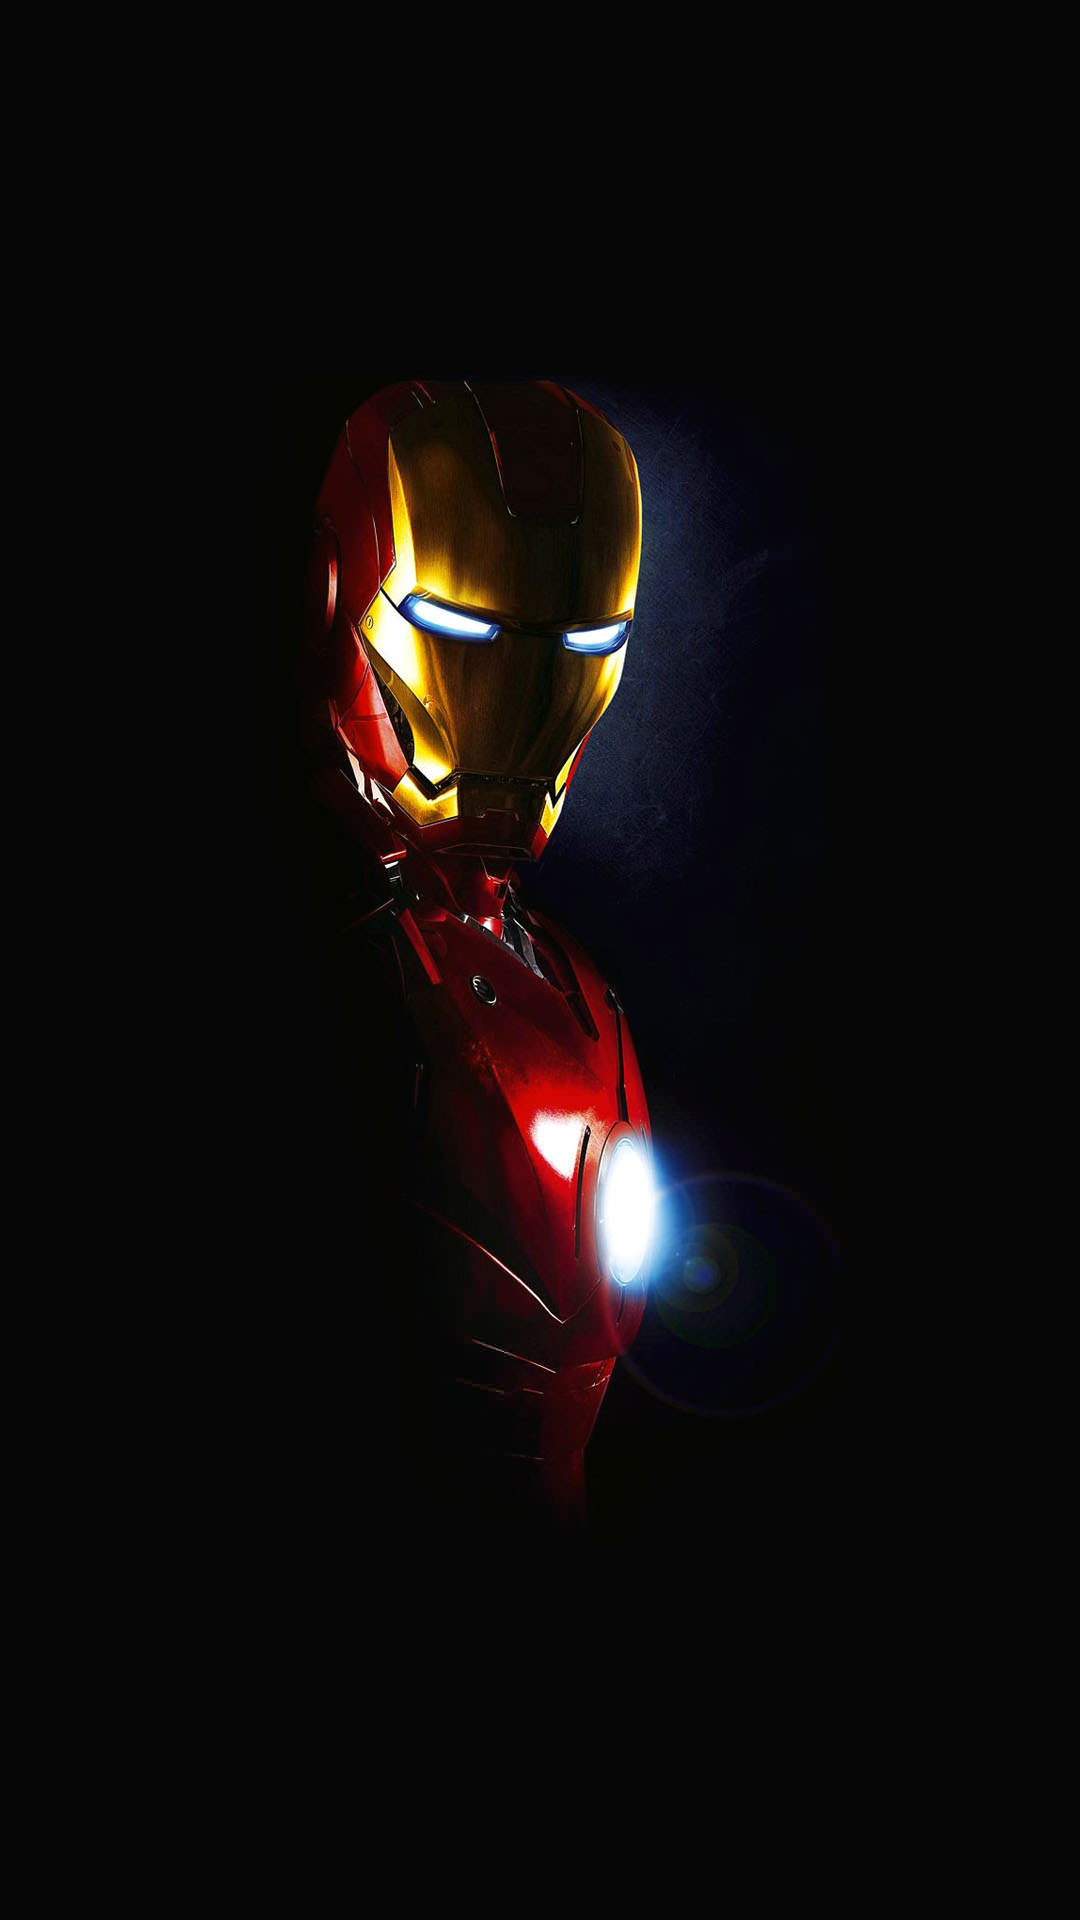 Best Hd Iron Man Wallpapers For Mobile - 1080x1920 Wallpaper 